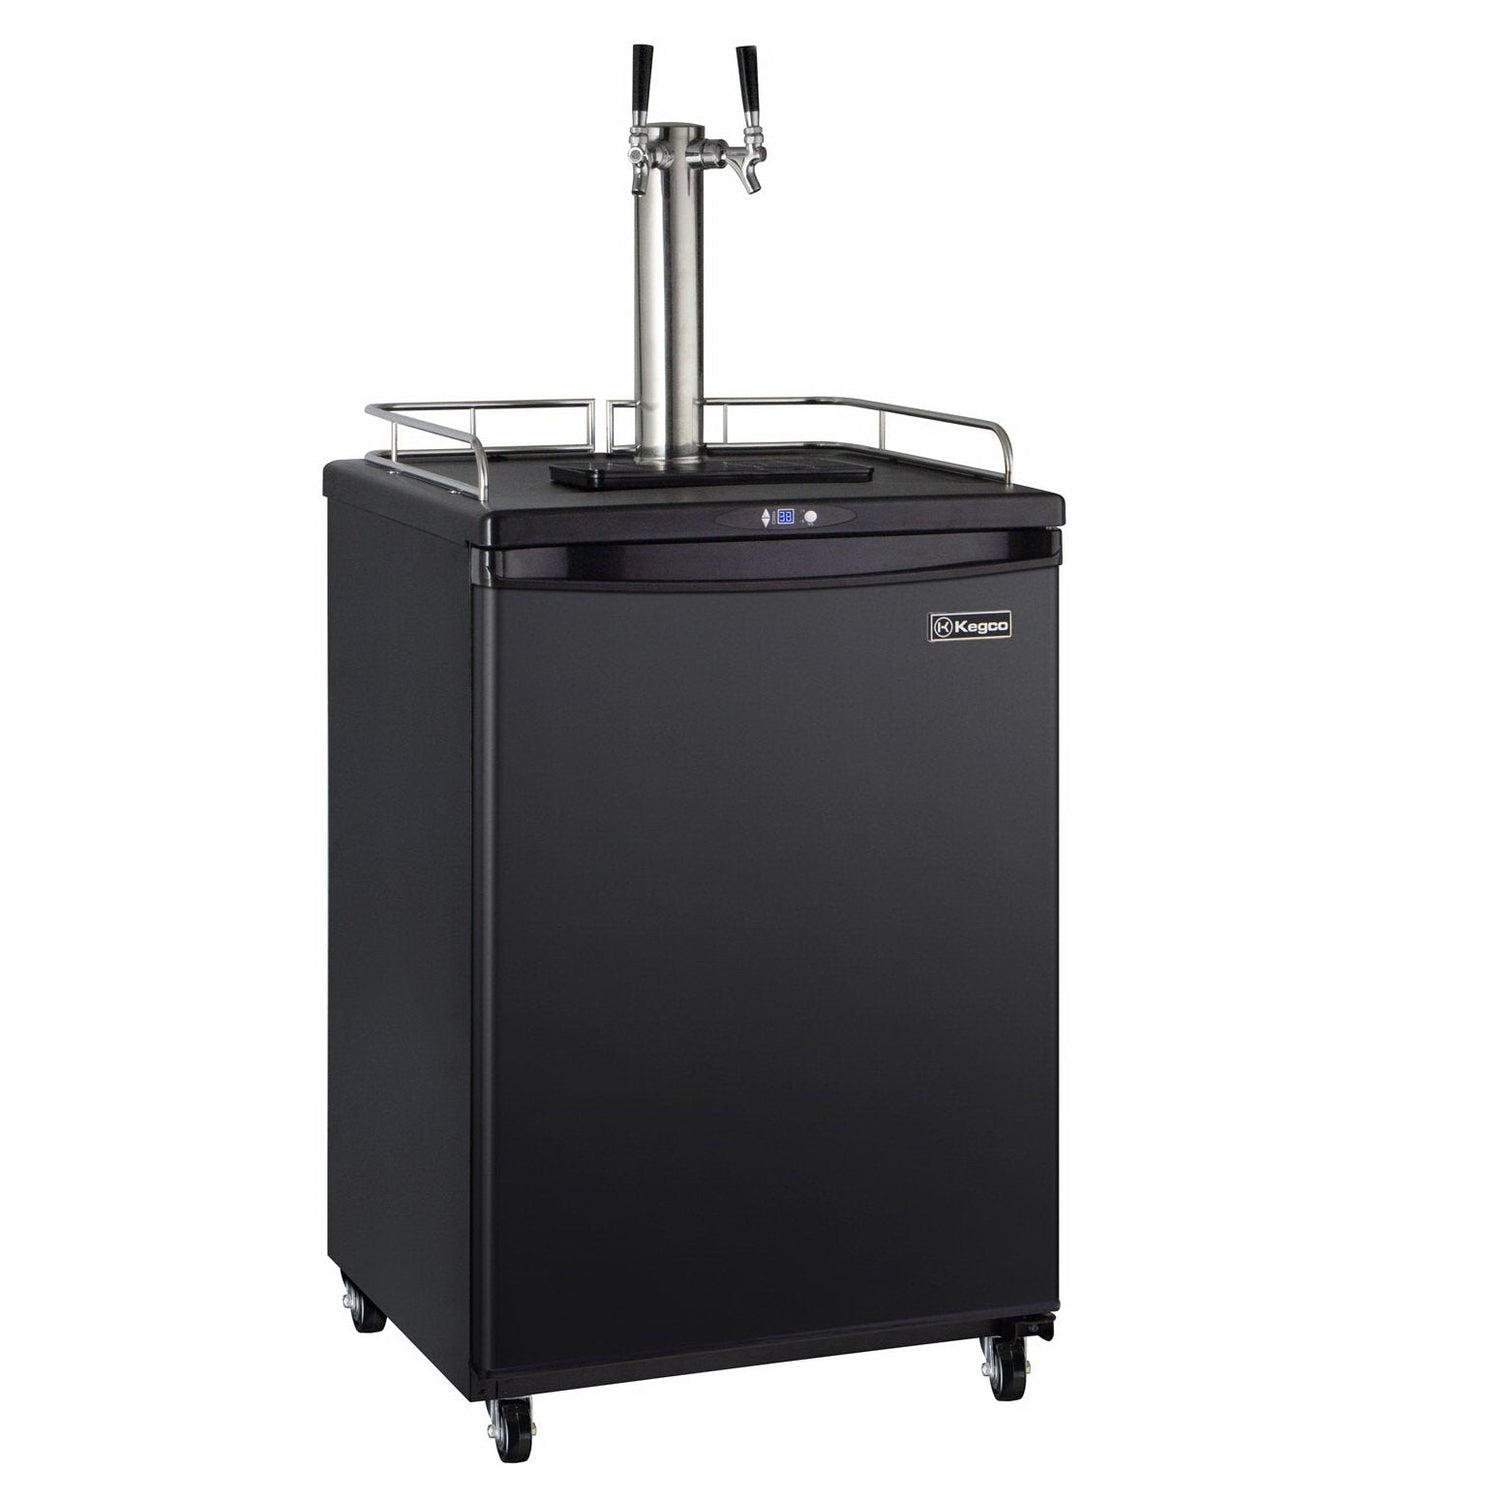 Kegco Two Faucet Commercial Grade Kegerator with Digital Temp Control - Black Cabinet with Black Door